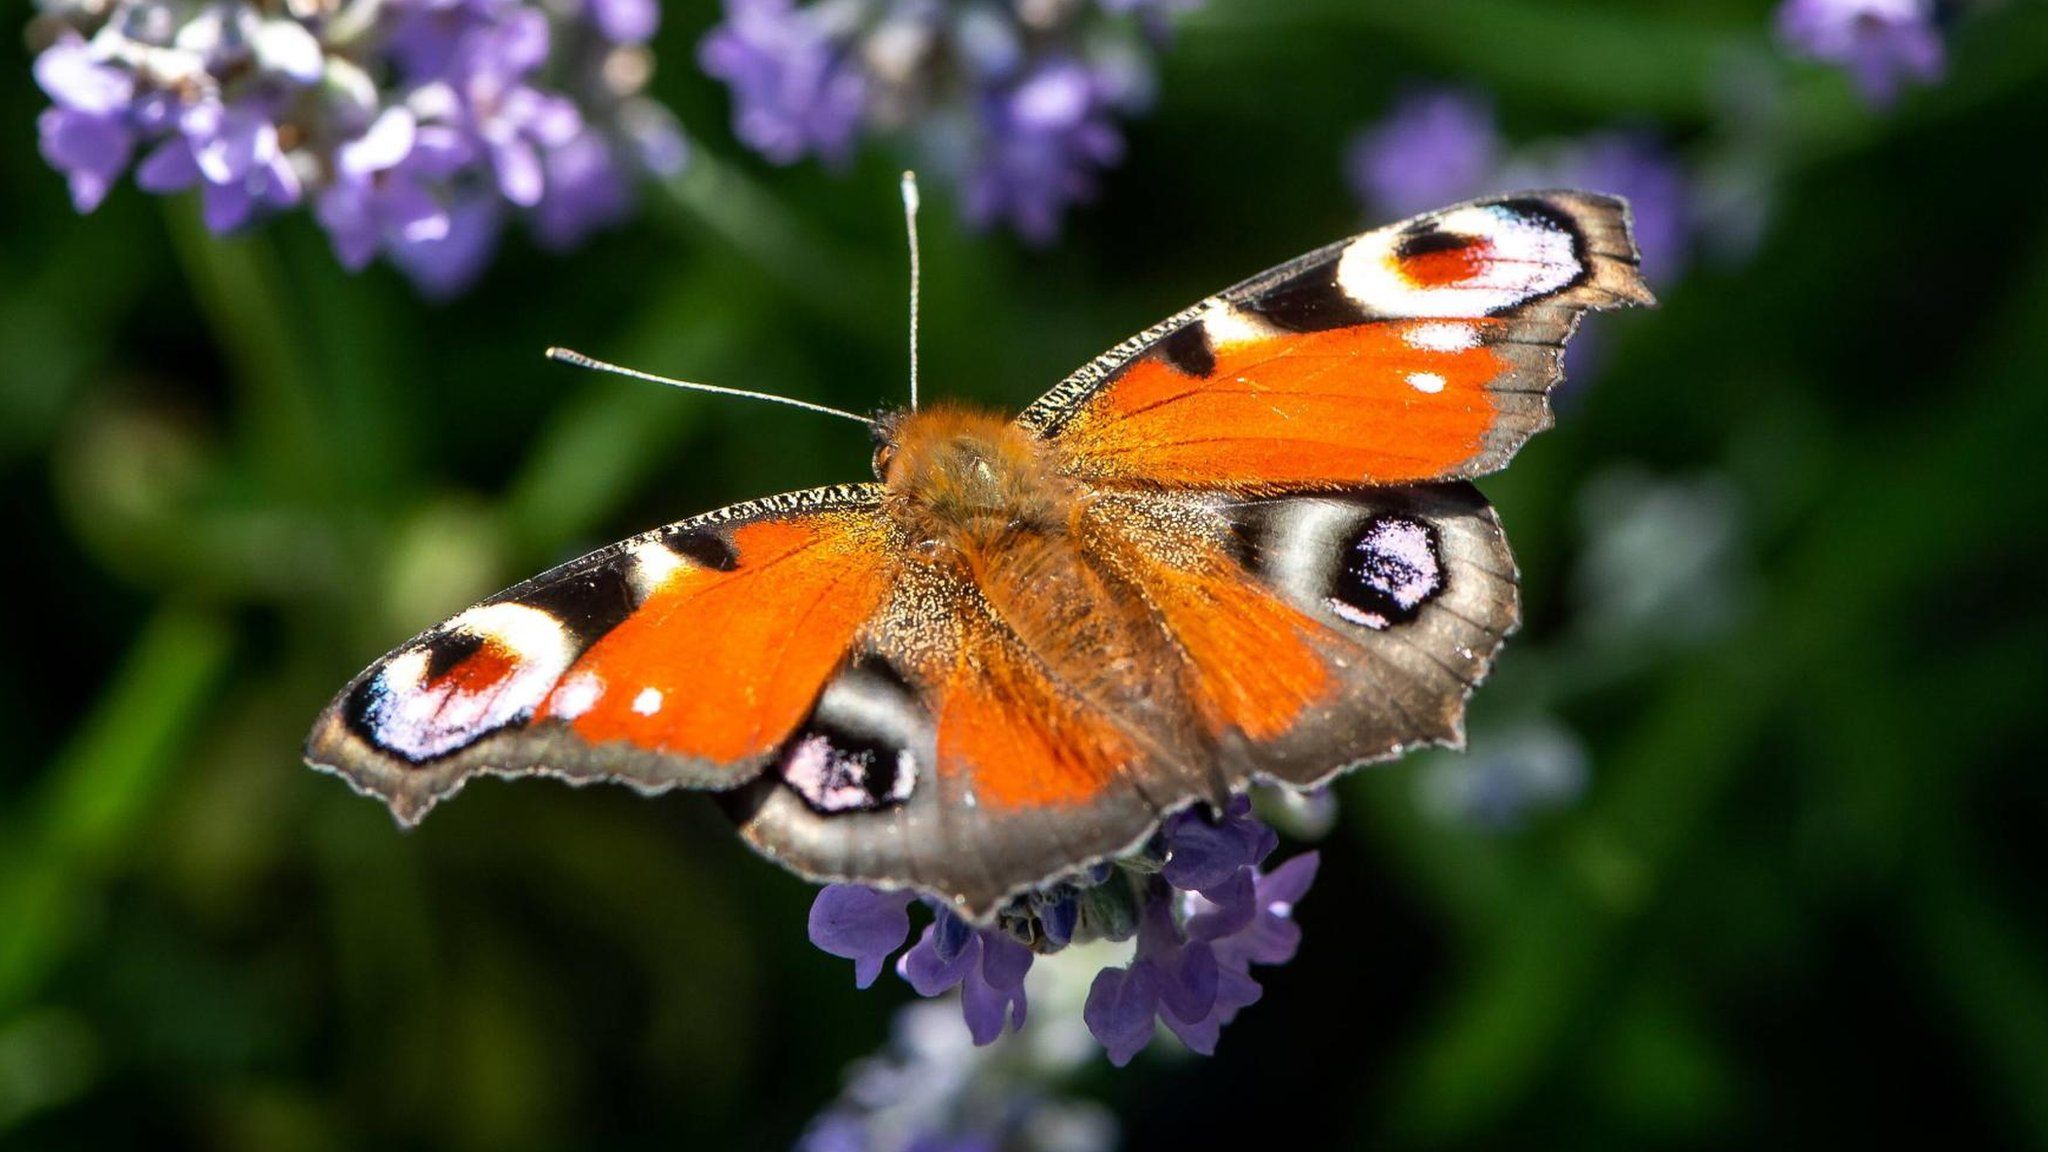 A Peacock russet butterfly